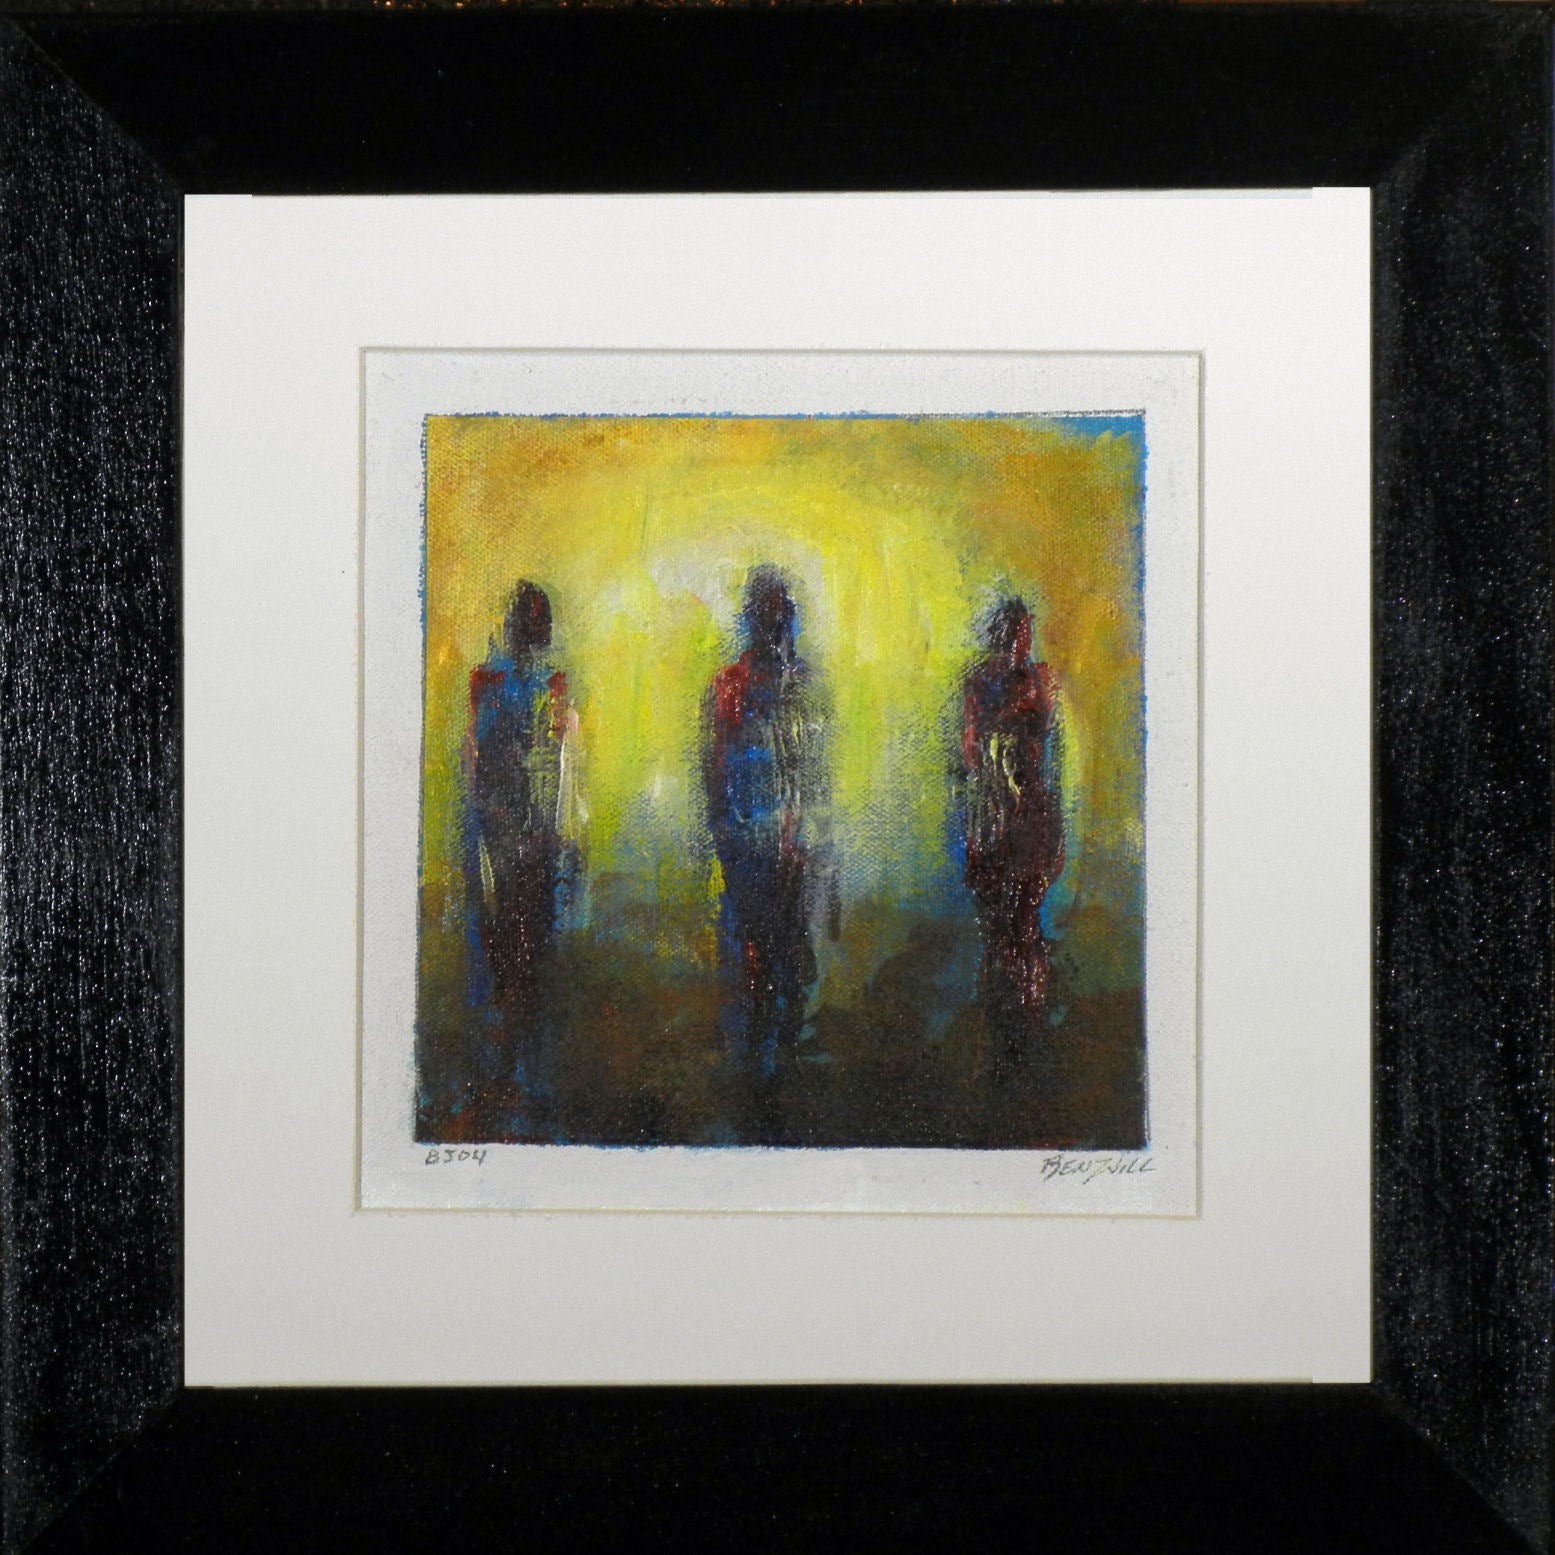 Framed Small Painting BJ04